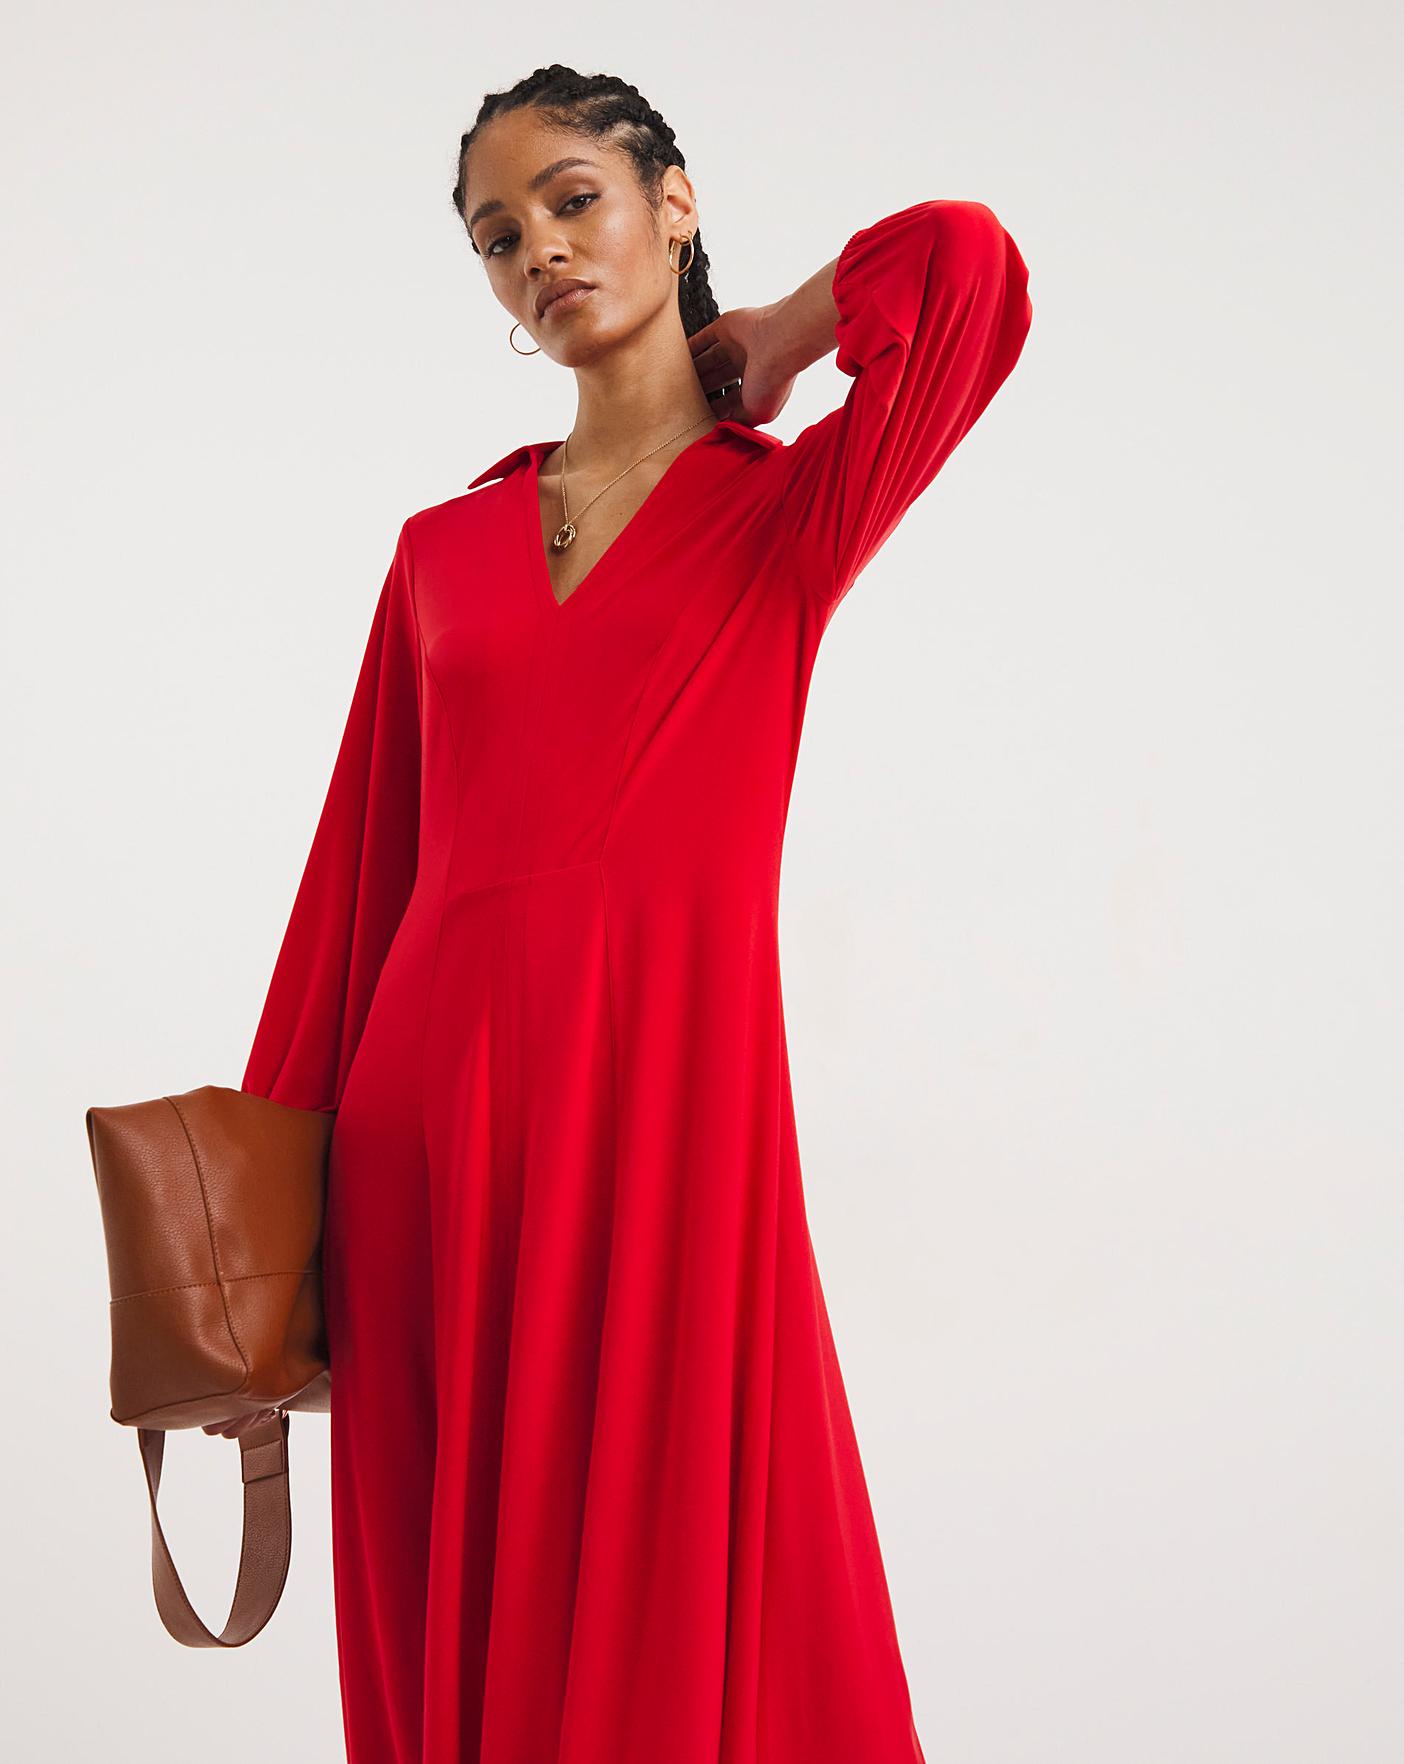 Waisted Dress With Open Neck & Collar | J D Williams